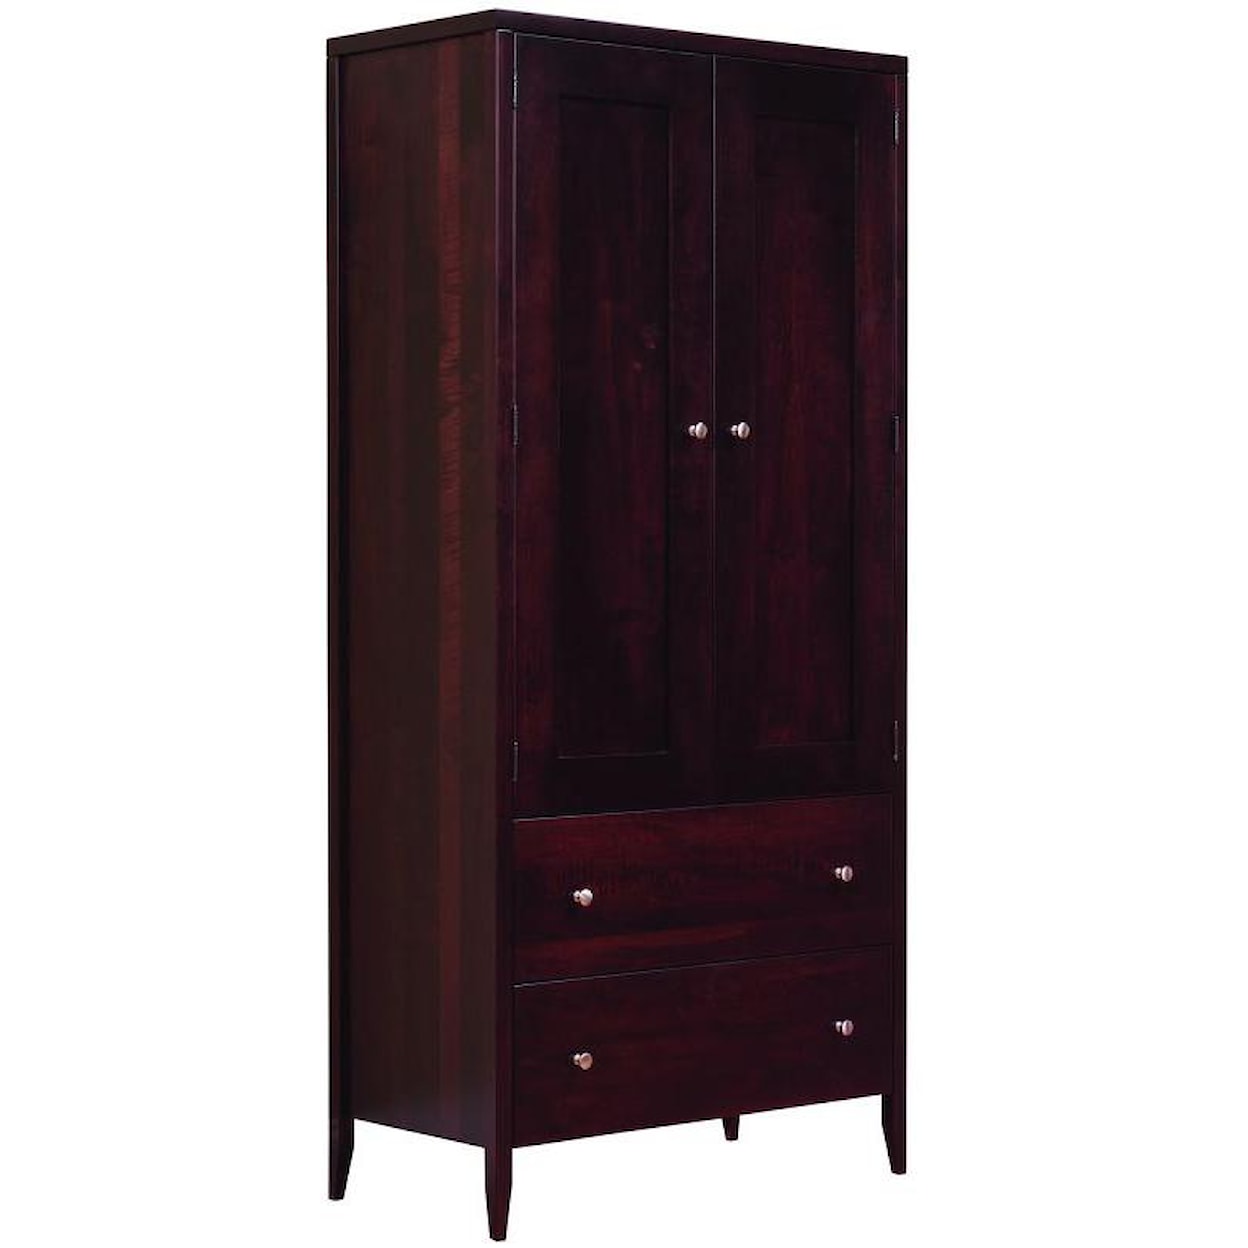 Canal Dover Furniture Renaissance Bedroom Armoire